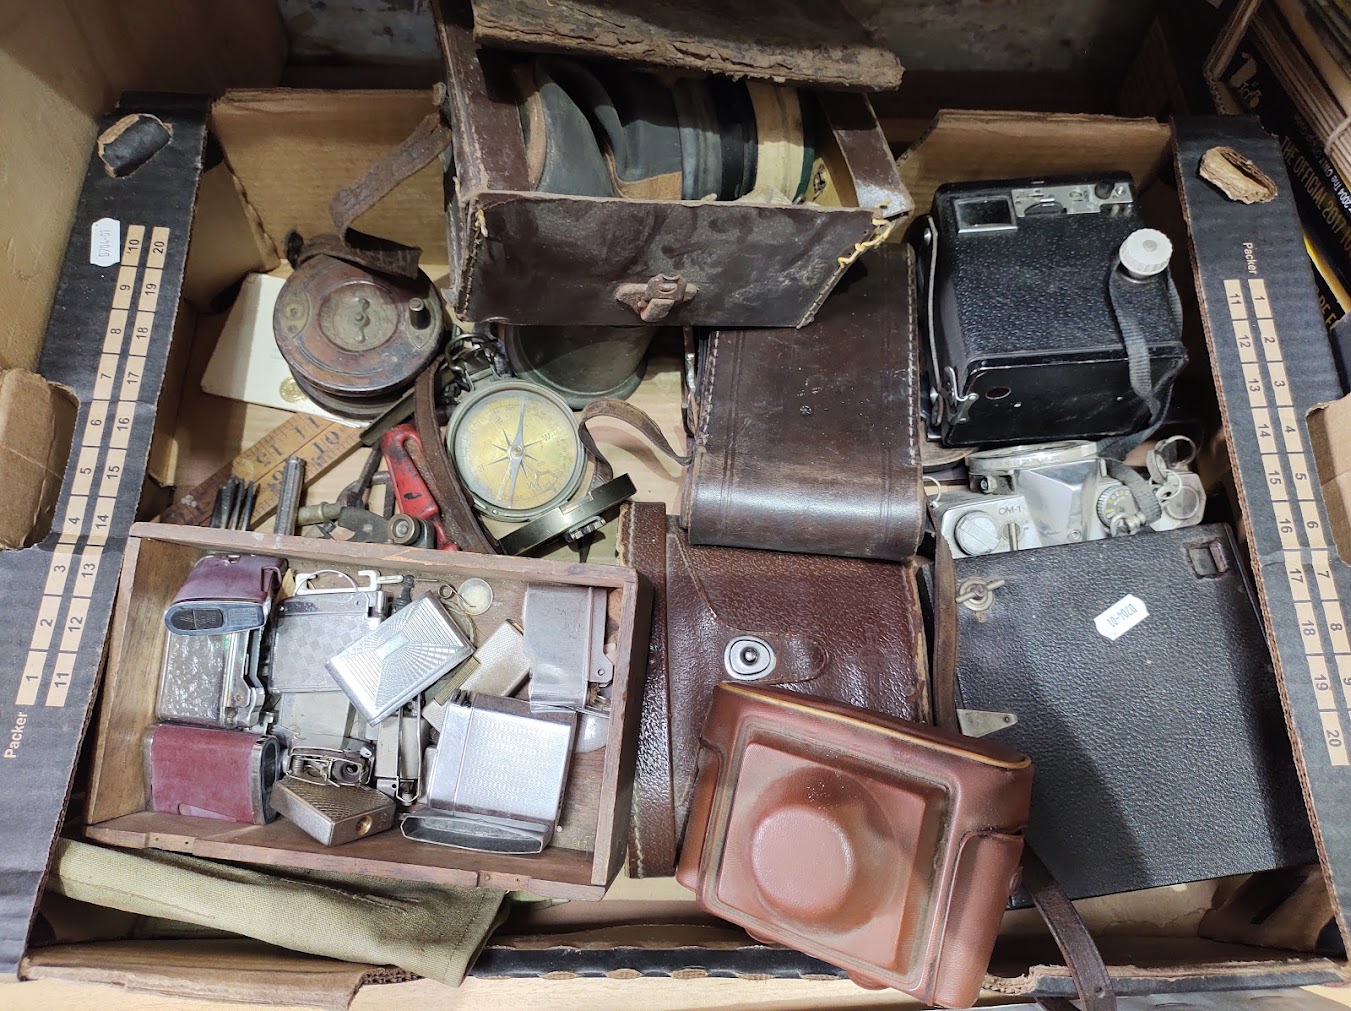 A box of mixed collectables including vintage cameras, cigarette lighters, binoculars, WWII era